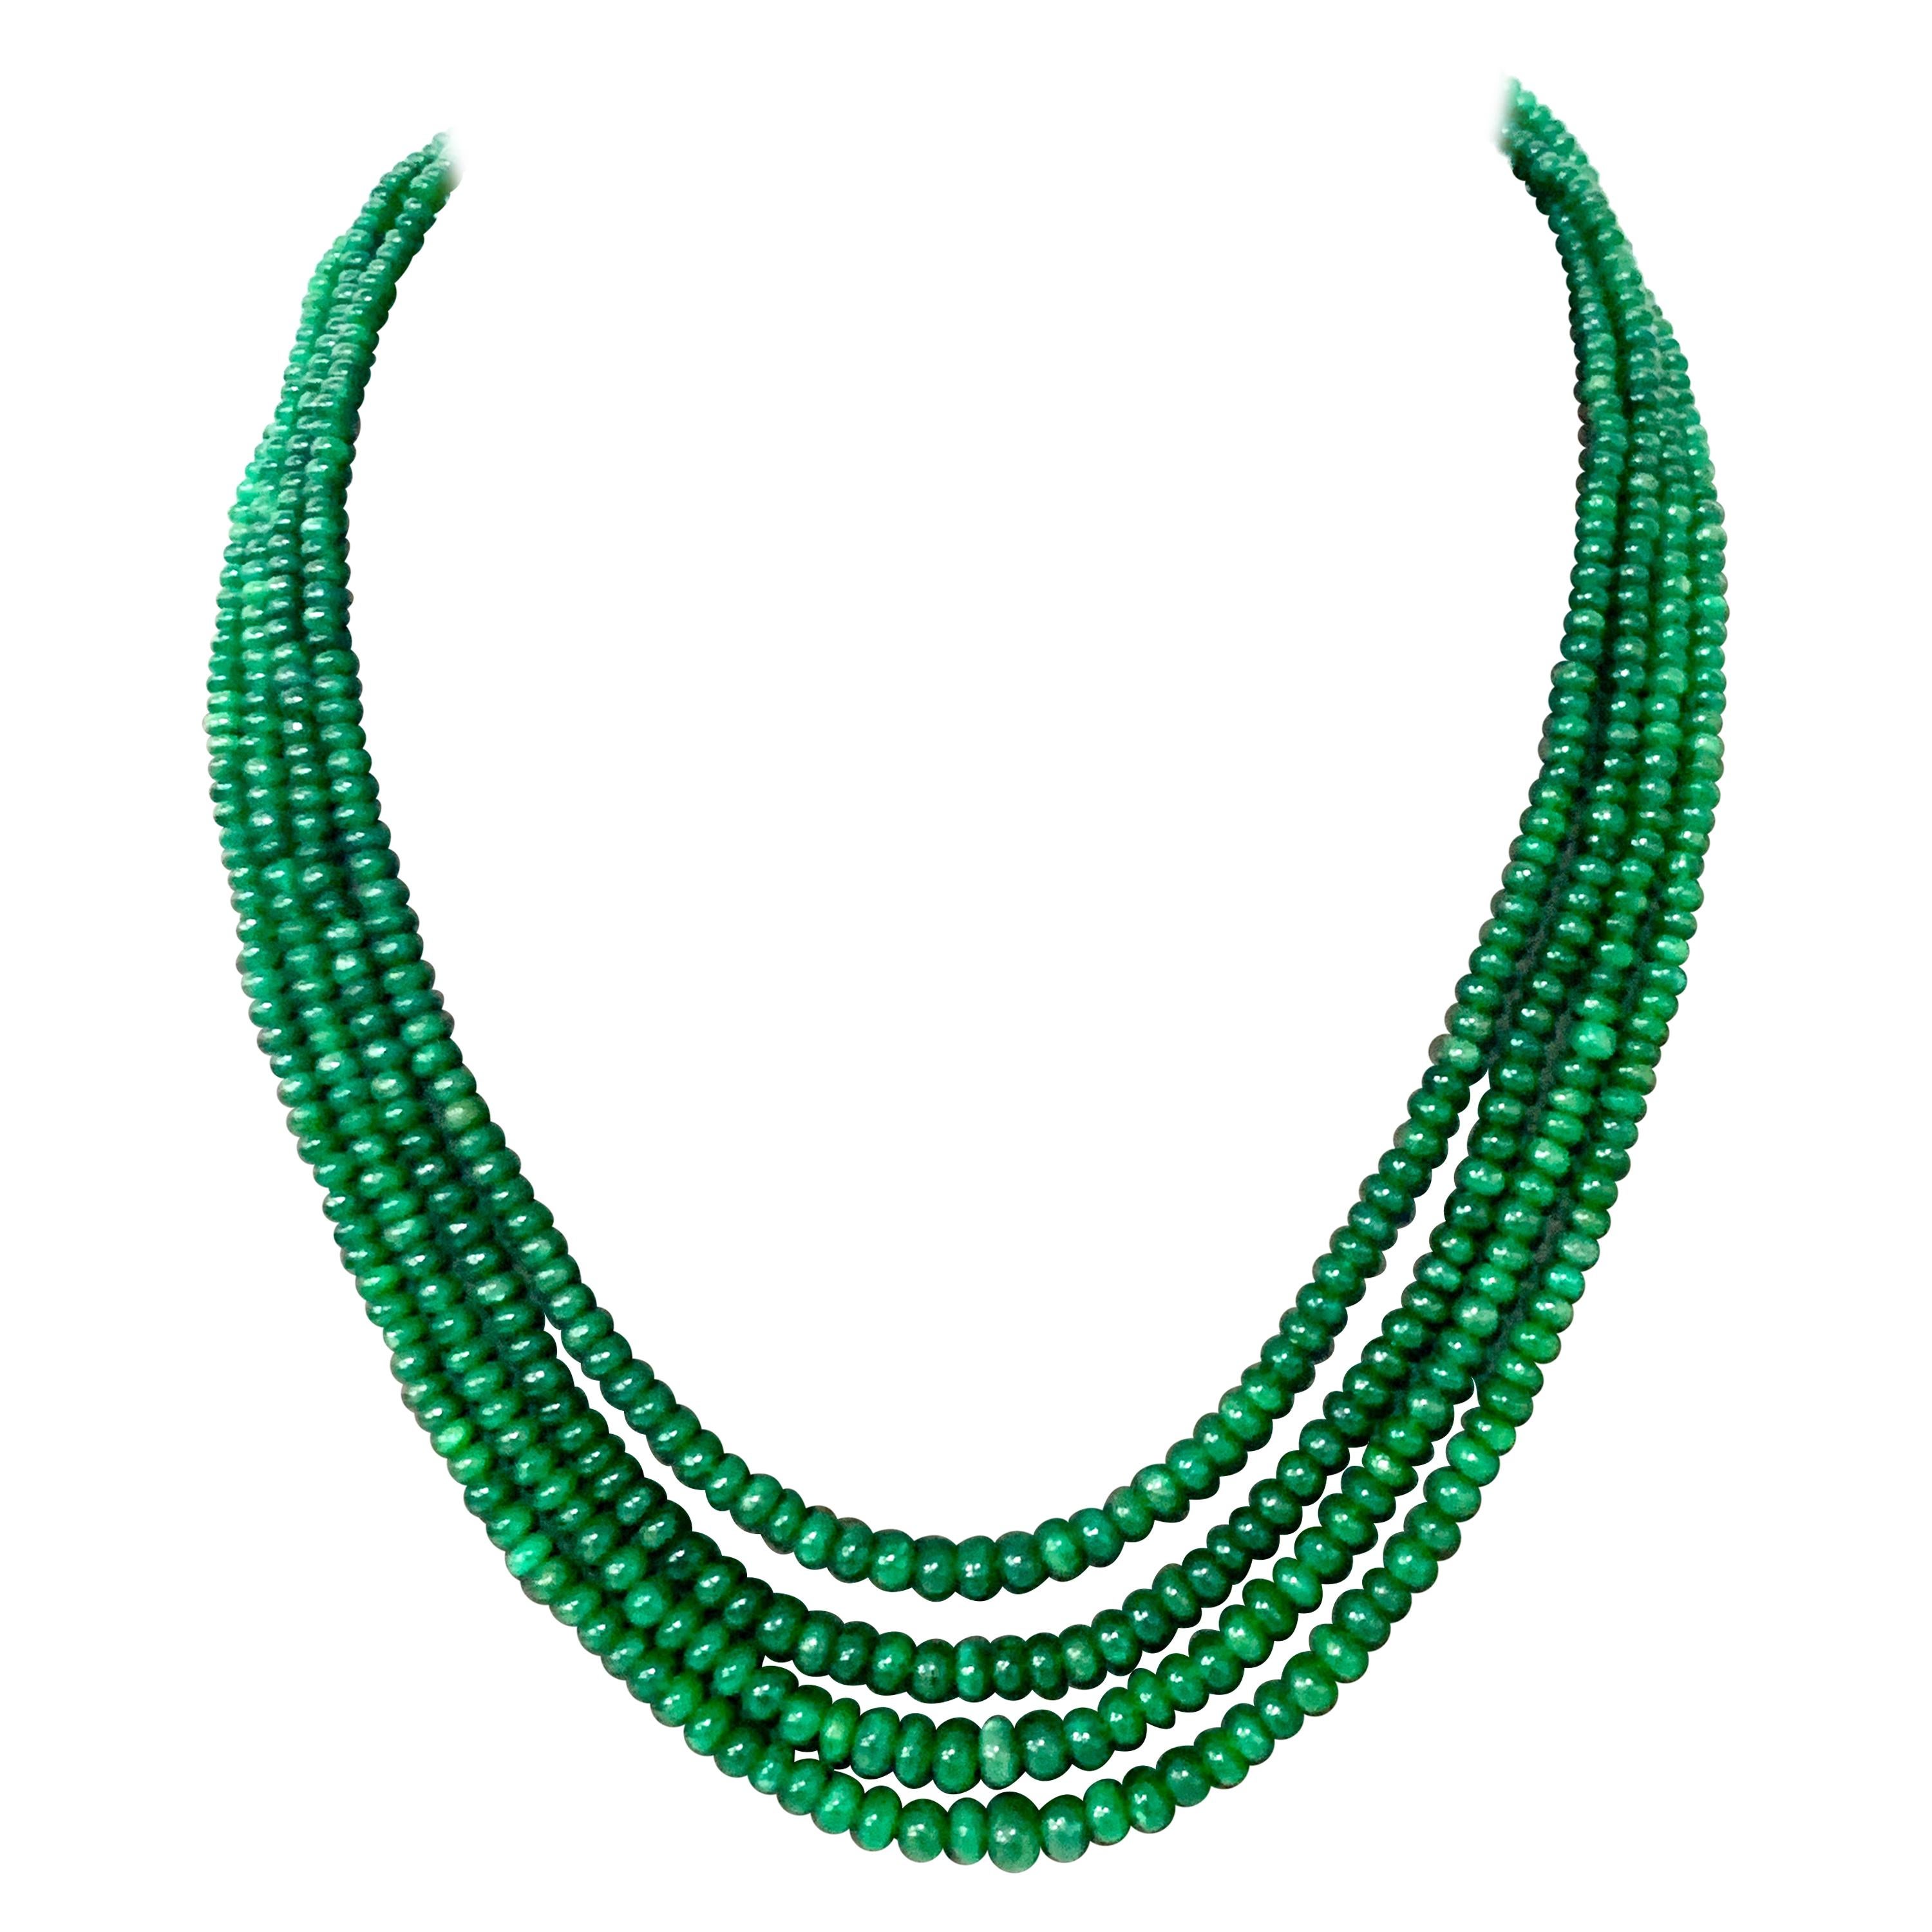 205 Carat 4 Layer Brazilian Emerald Bead Necklace Sterling Silver Clasp